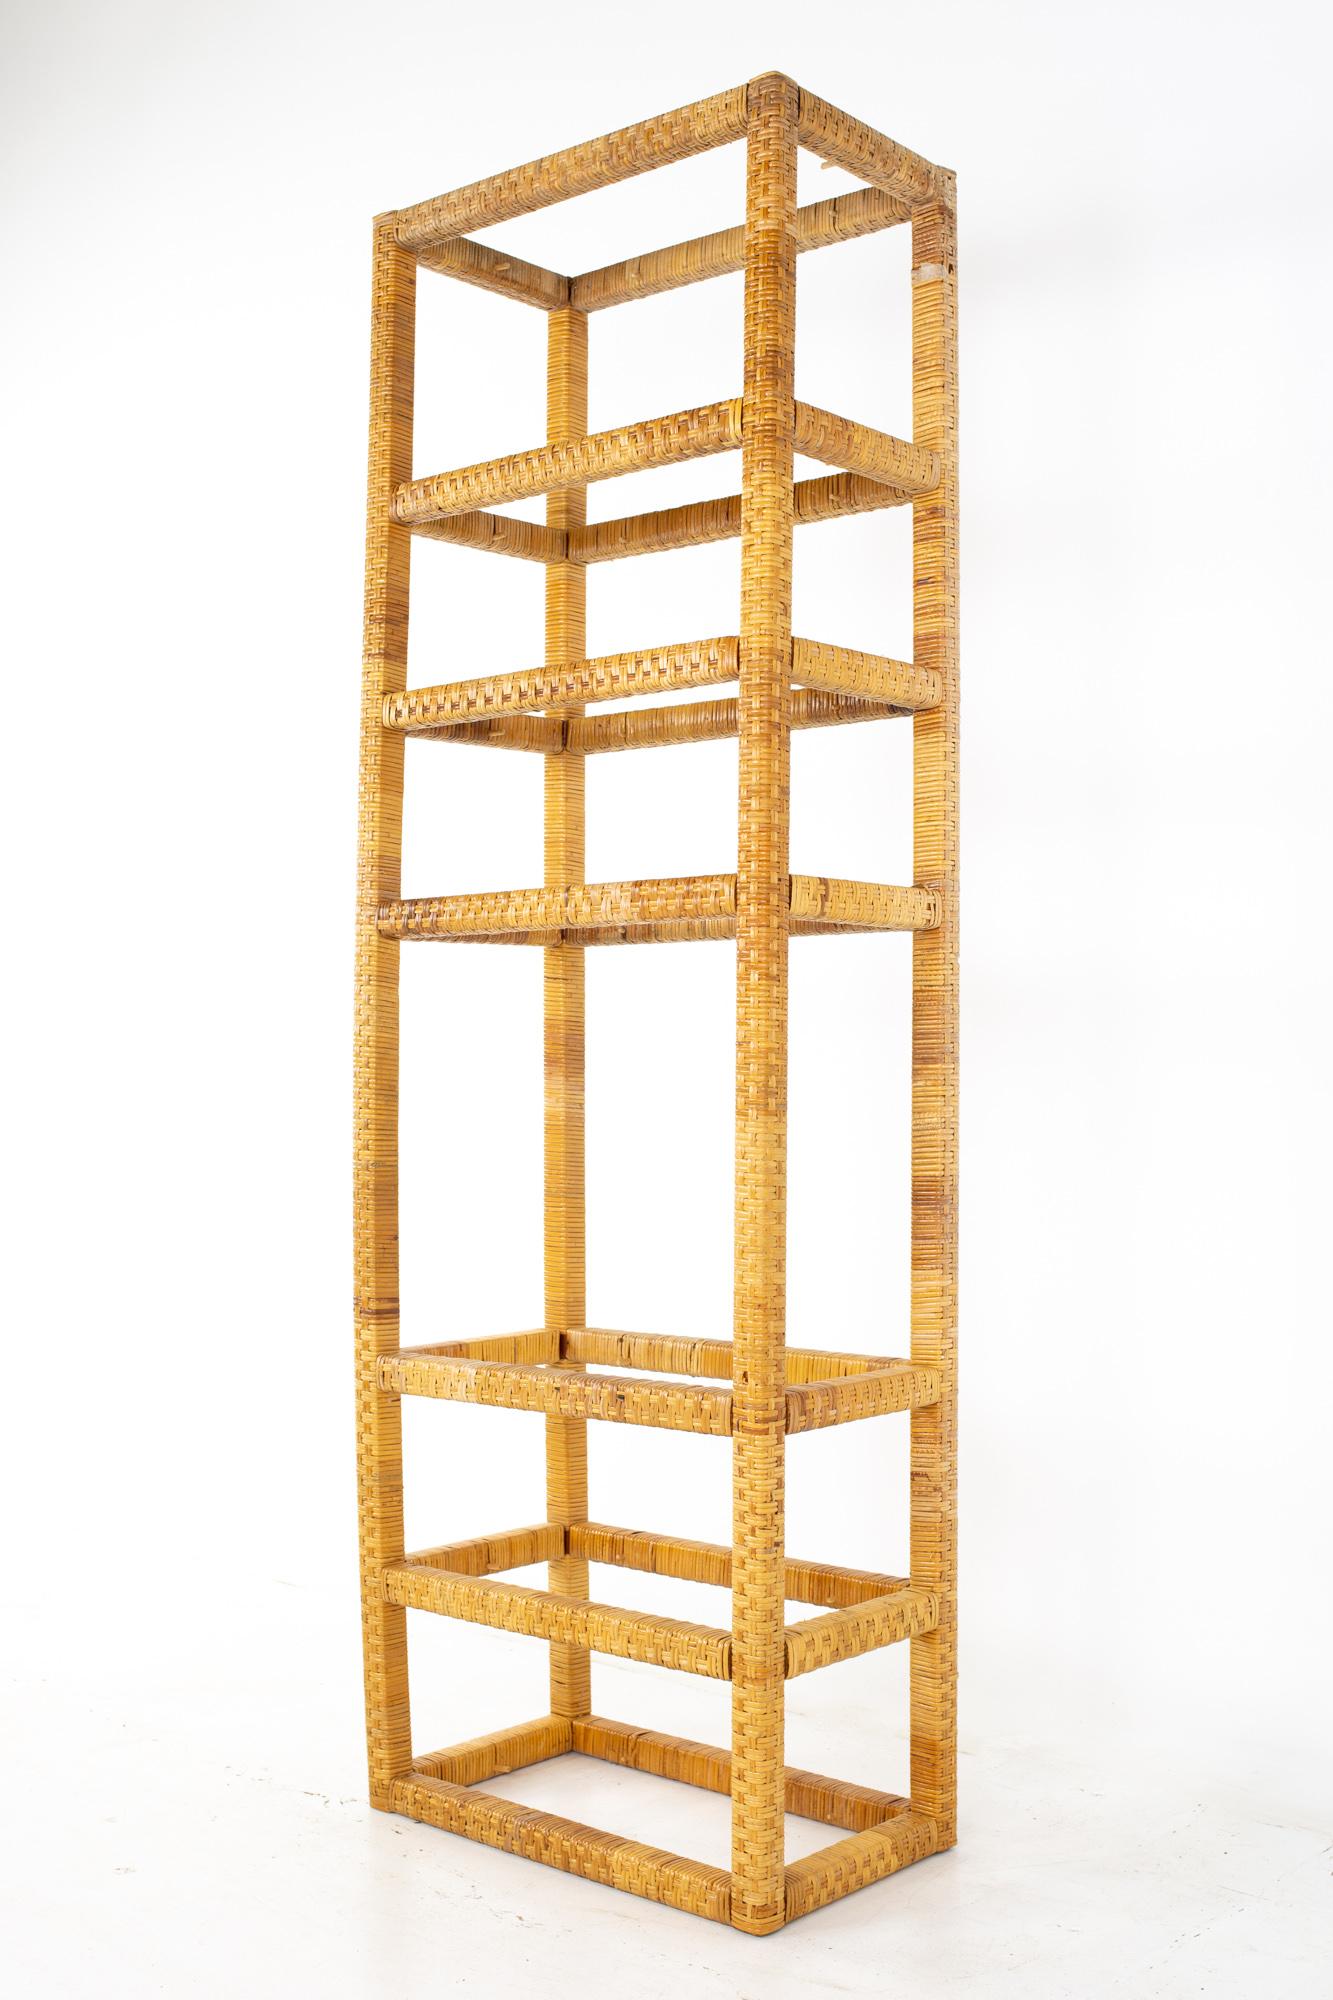 Mid century tall cane and glass étagère shelf
Shelf measures: 27 wide x 16 deep x 84 inches high

All pieces of furniture can be had in what we call restored vintage condition. That means the piece is restored upon purchase so it’s free of